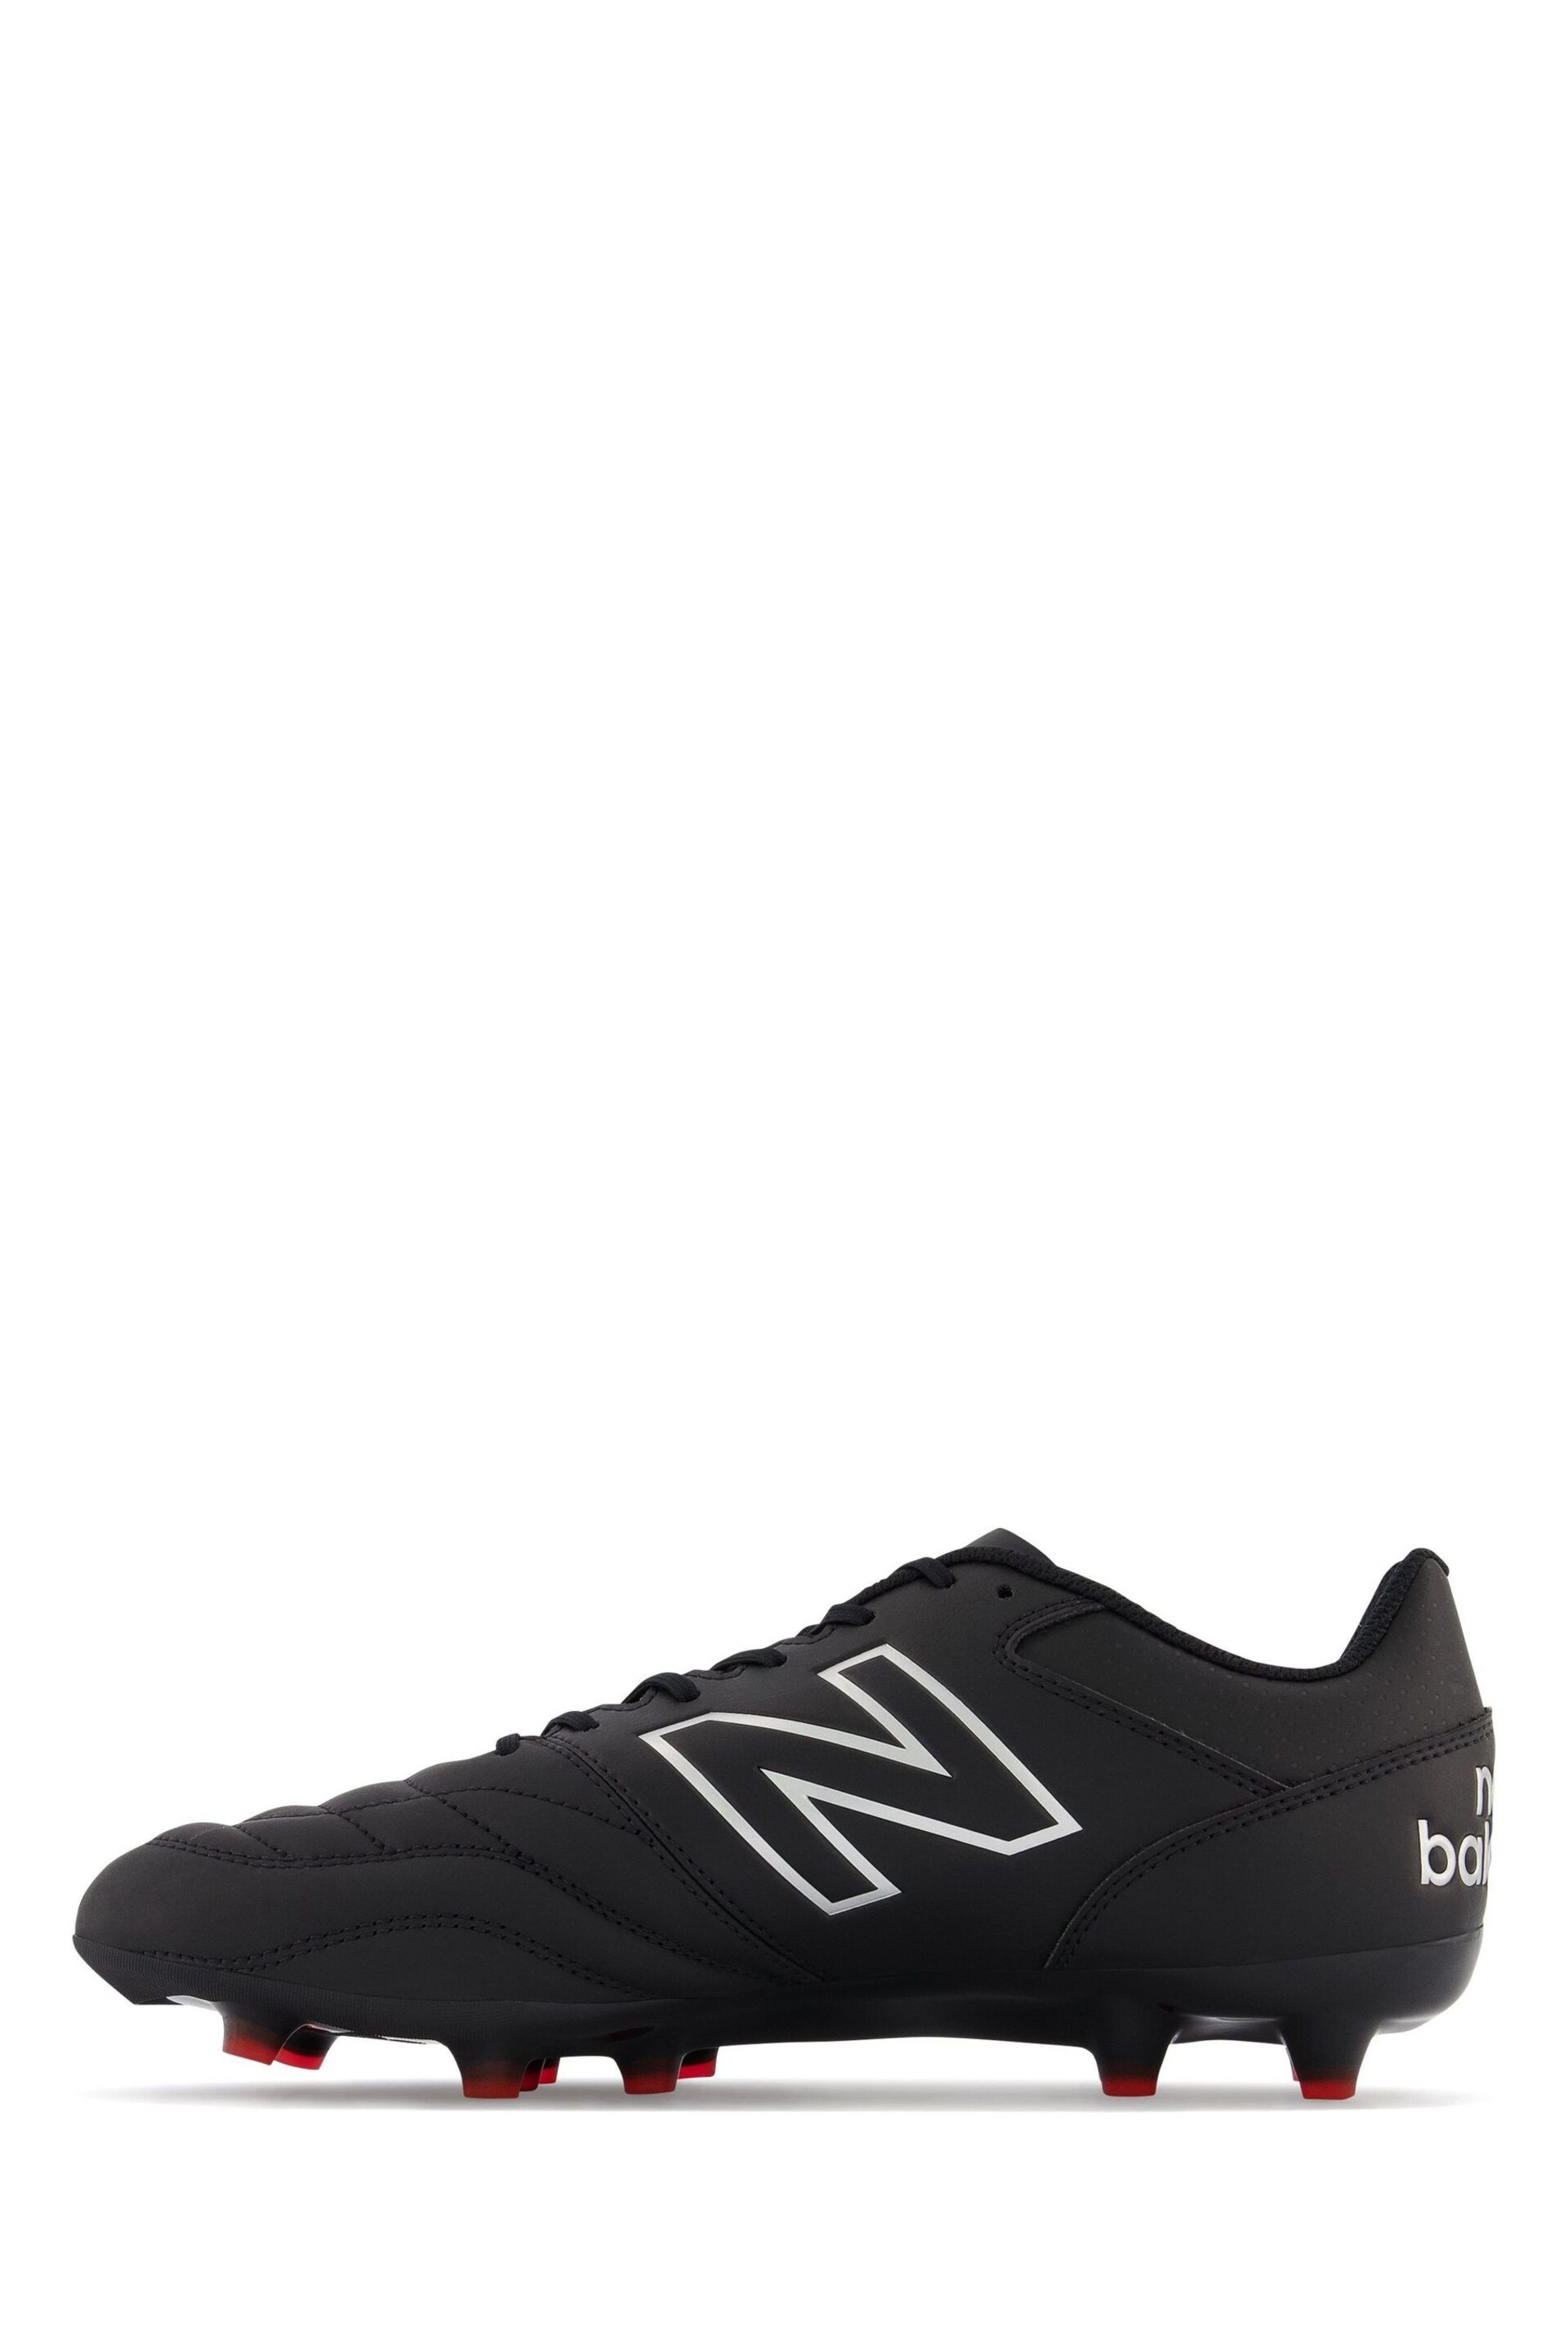 New Balance Black Mens 442 Firm Football Boots - Image 2 of 6